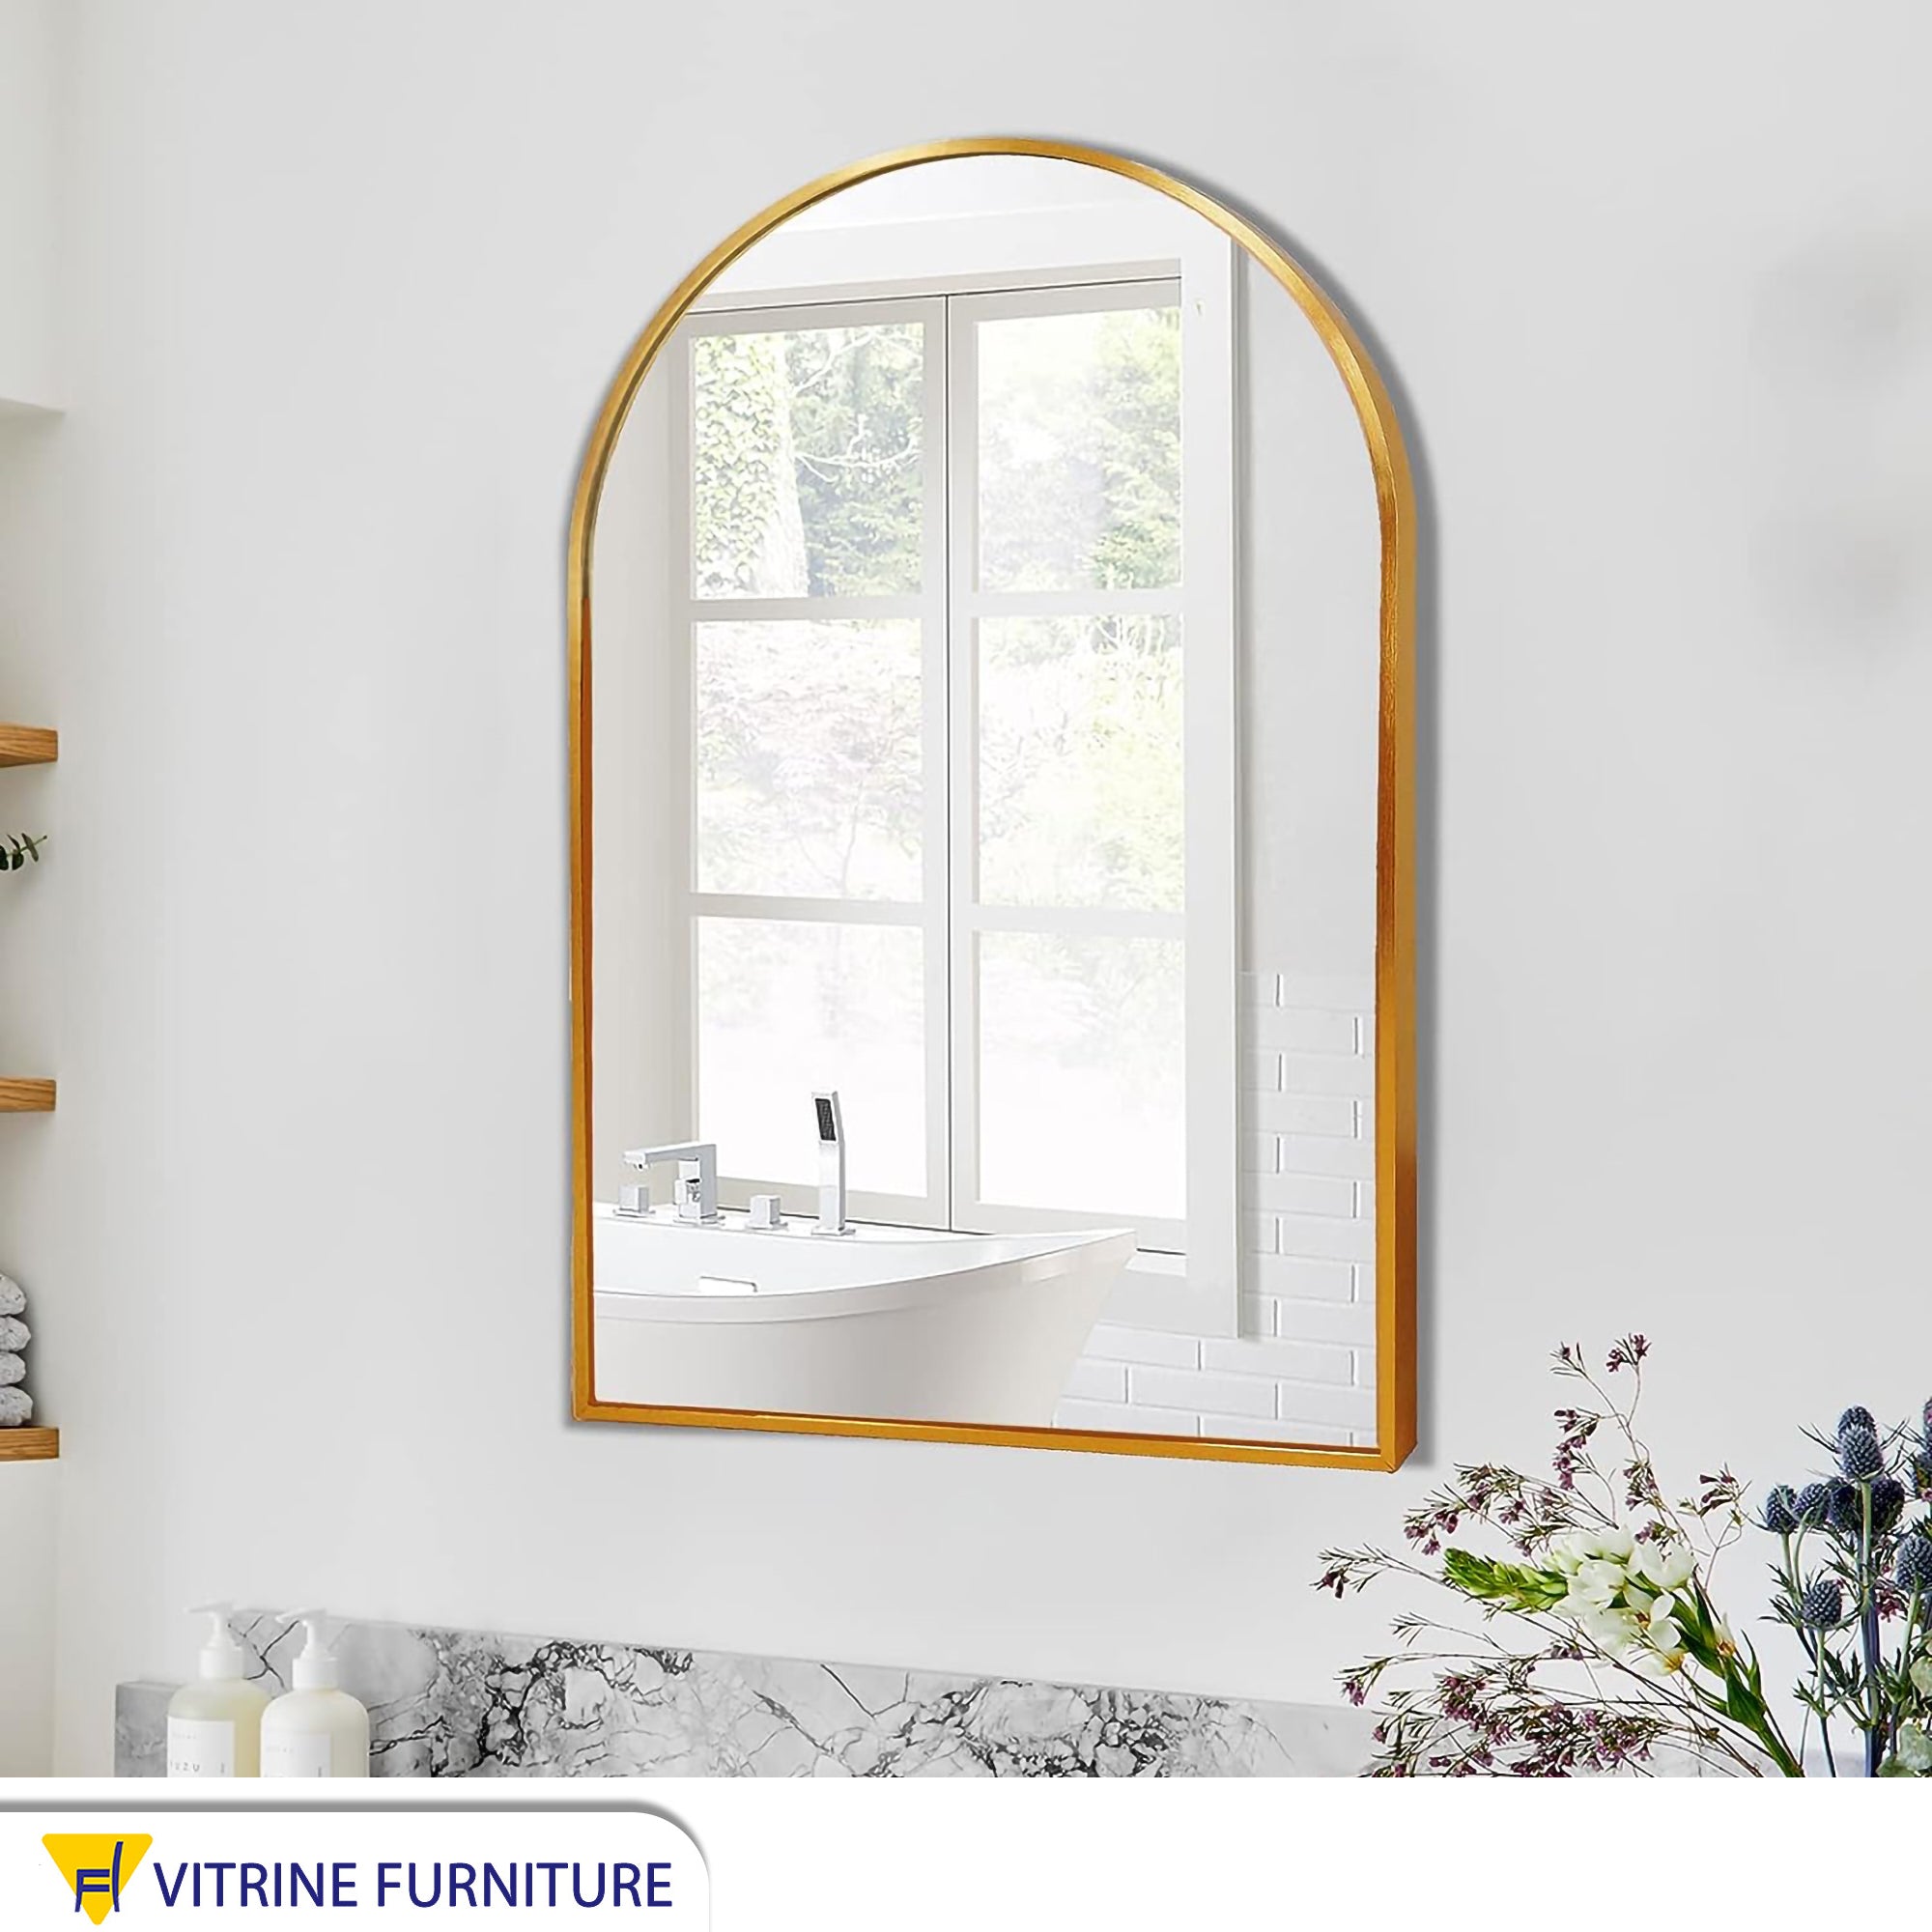 Arch mirror 50*70 with a golden wood frame